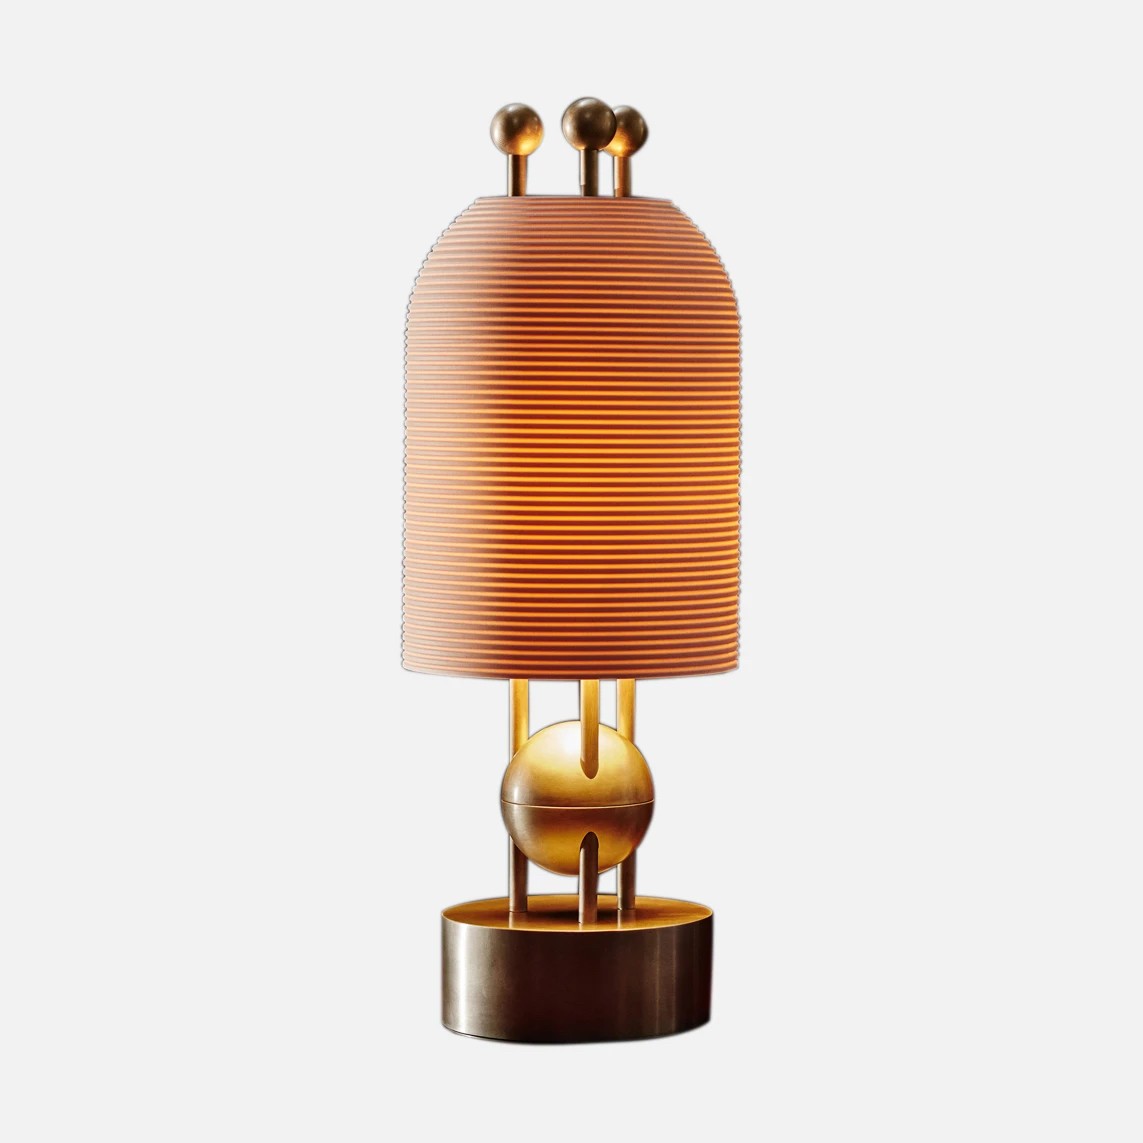 The image of an Lantern Table Lamp product